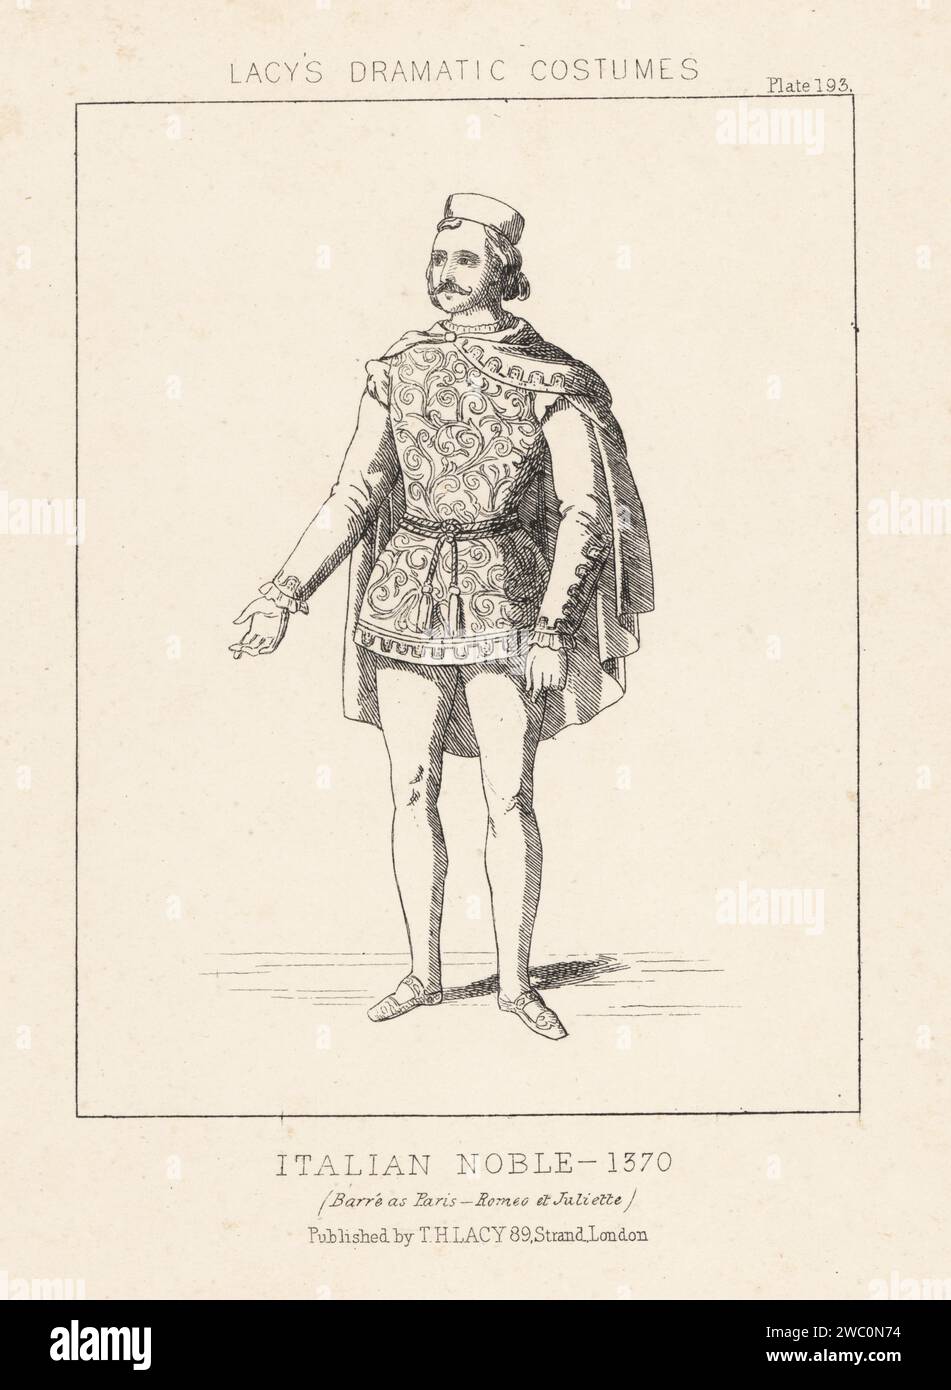 French baritone Auguste Armand Barre as Mercutio in the opera Romeo et Juliette by Charles Gounod at the Theatre Lyrique, Paris, 1867. Barre as Paris (sic). Costume of an Italian noble, 1370. Lithograph from Thomas Hailes Lacy's Male Costumes, Historical, National and Dramatic in 200 Plates, London, 1865. Lacy (1809-1873) was a British actor, playwright, theatrical manager and publisher. Stock Photo